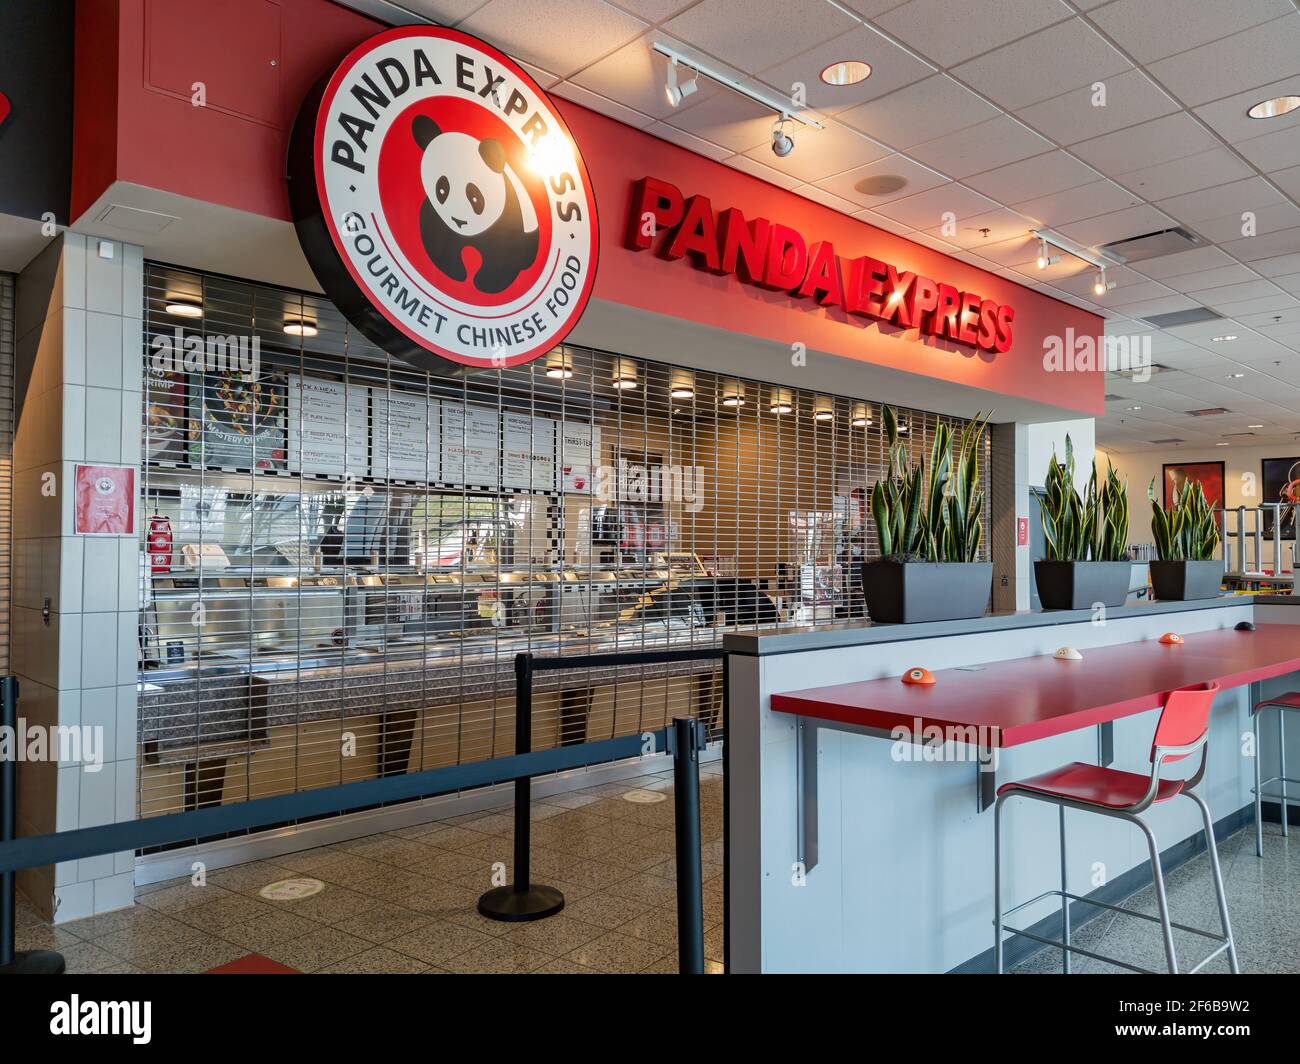 Inside Panda Express at the Food Court., This is the inside…